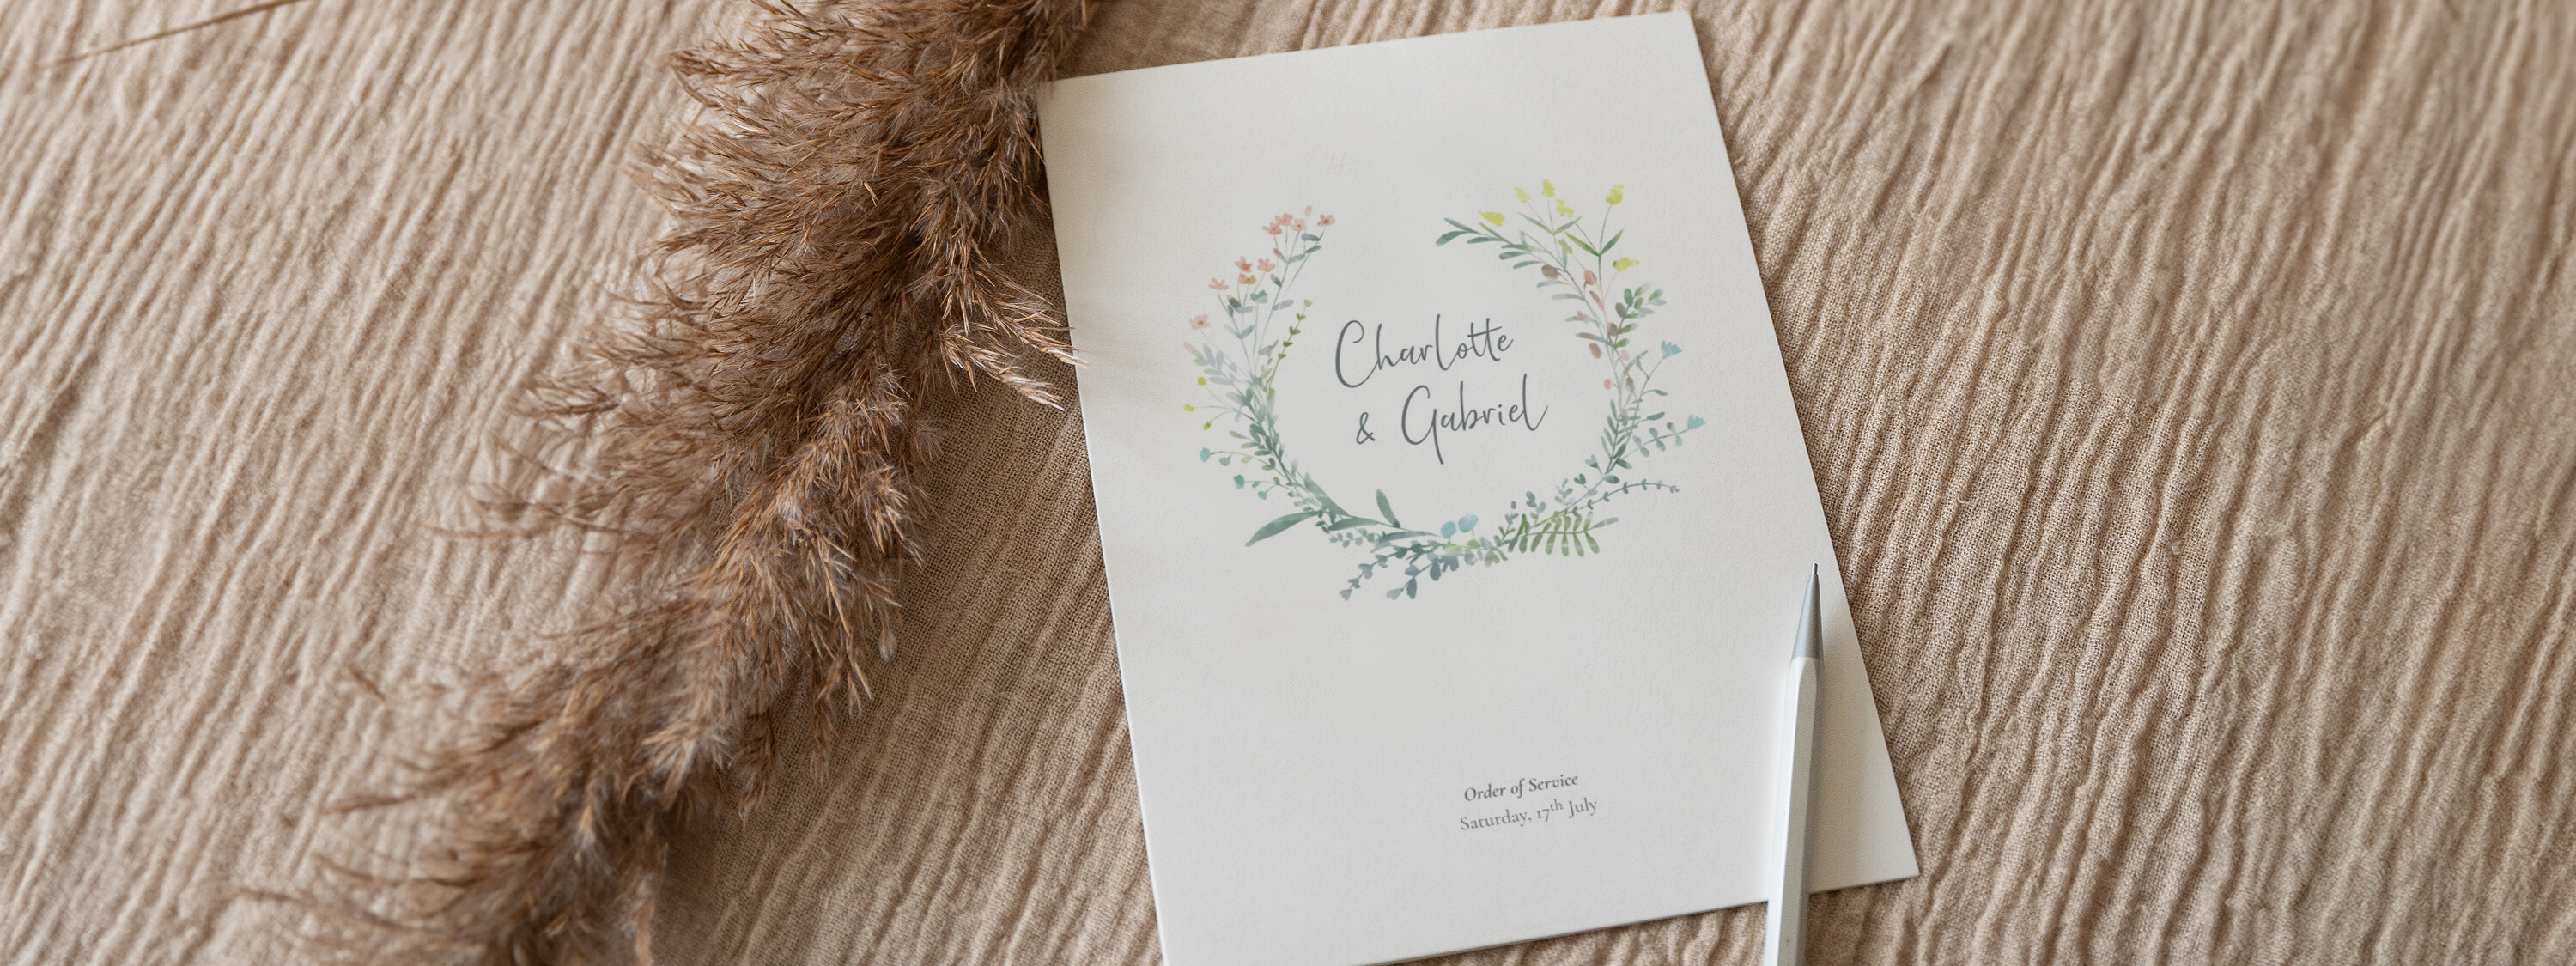 Wedding Order of Service Booklet Covers 